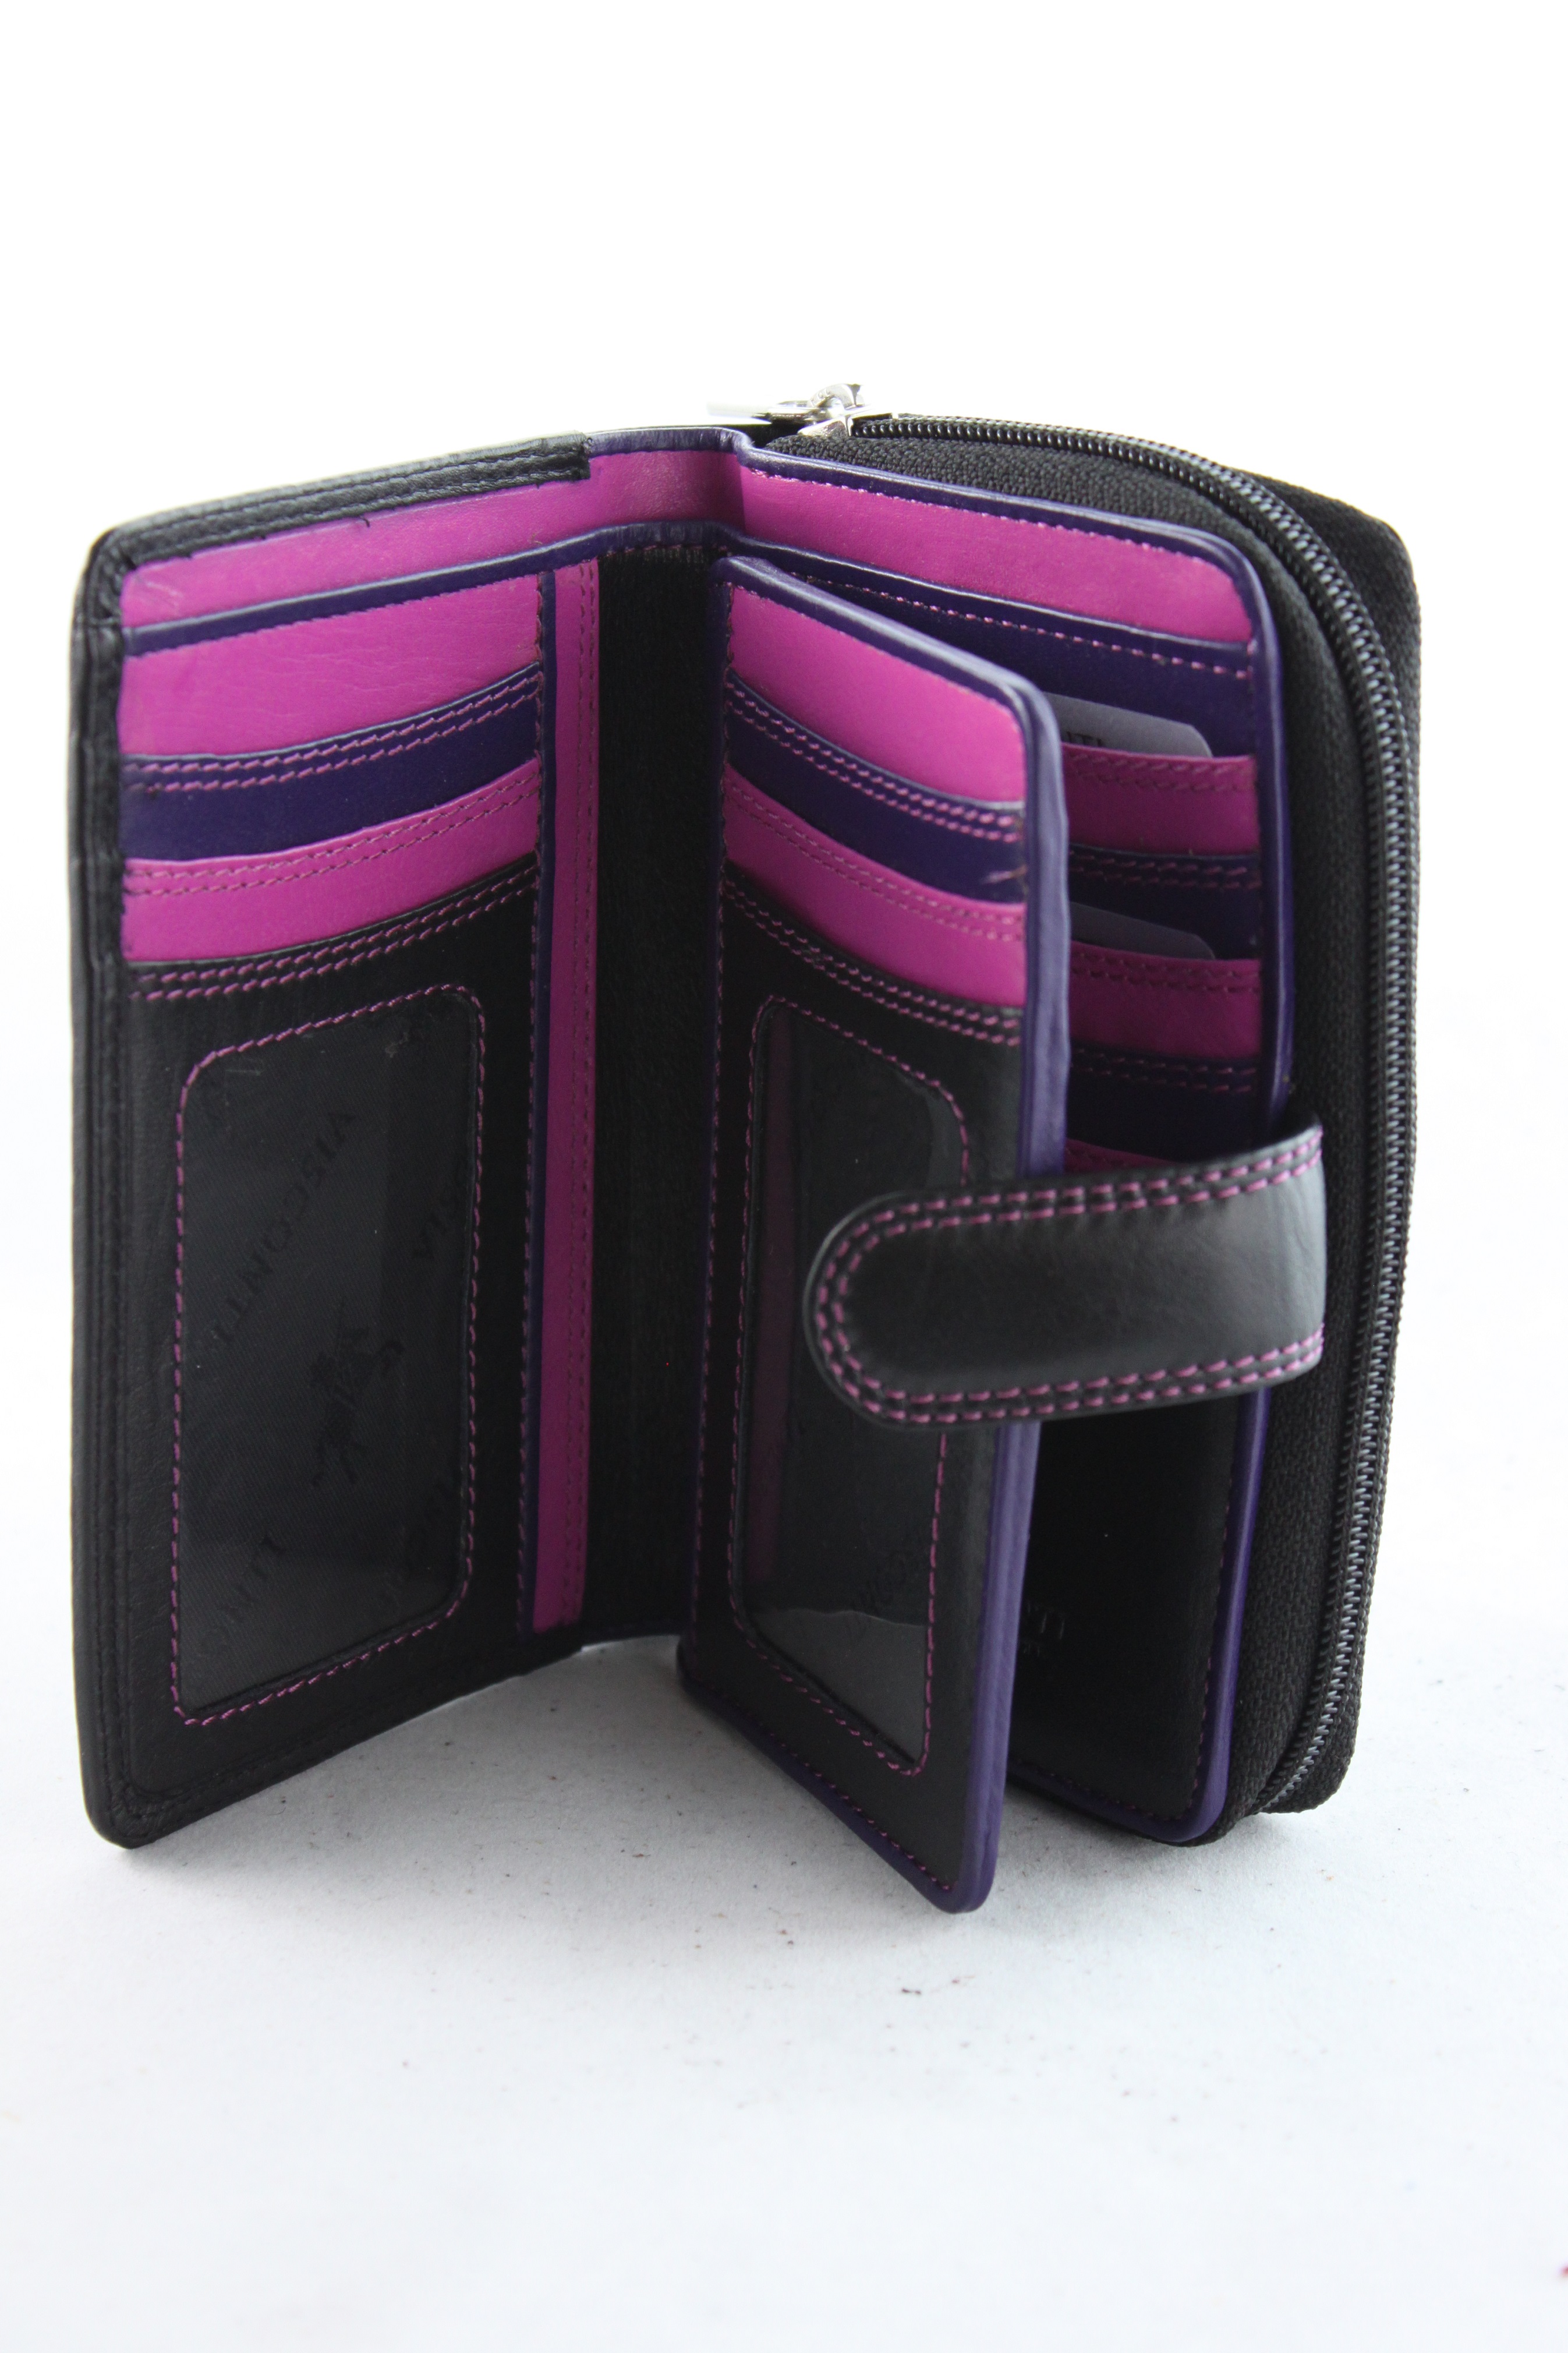 Multi Compartment Soft Leather Purse Wallet For Ladies - Berry